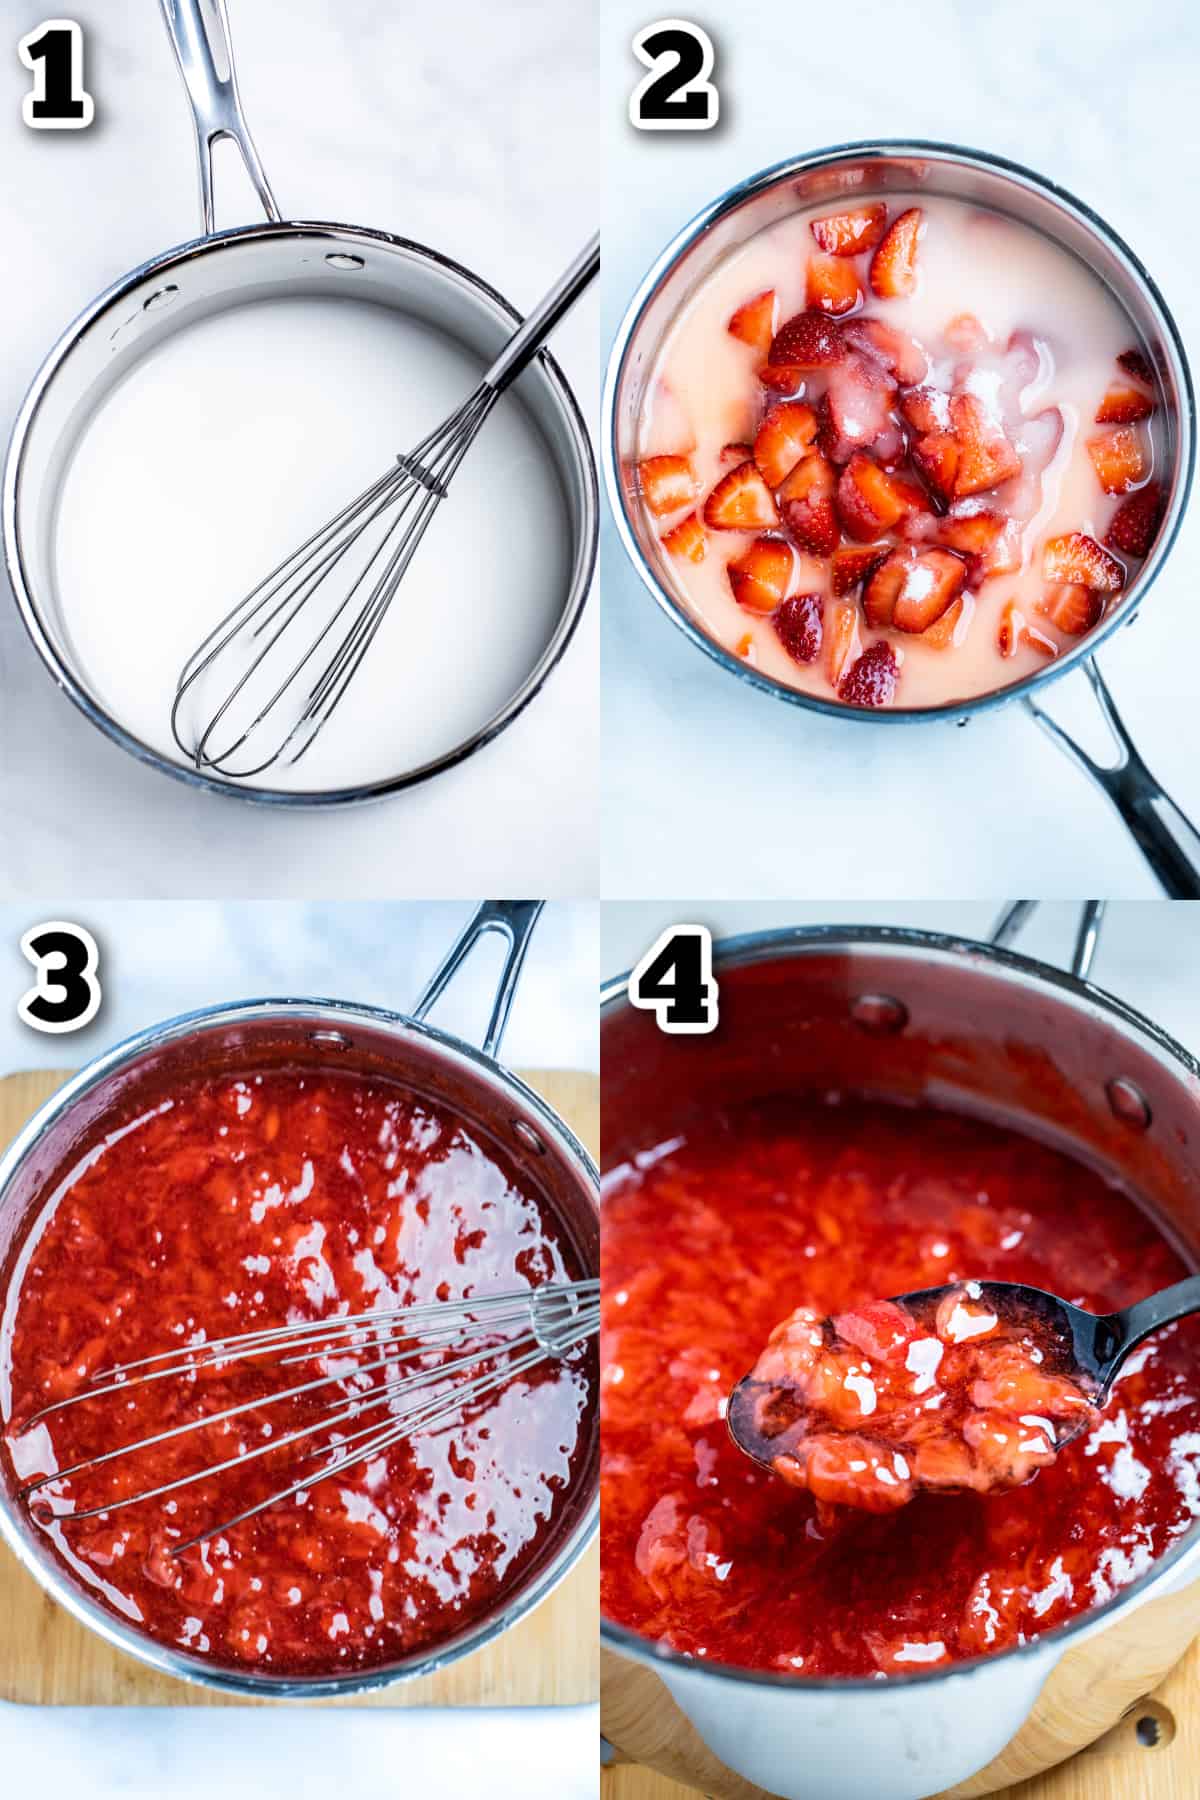 Step by step photos for how to make strawberry cake filling.